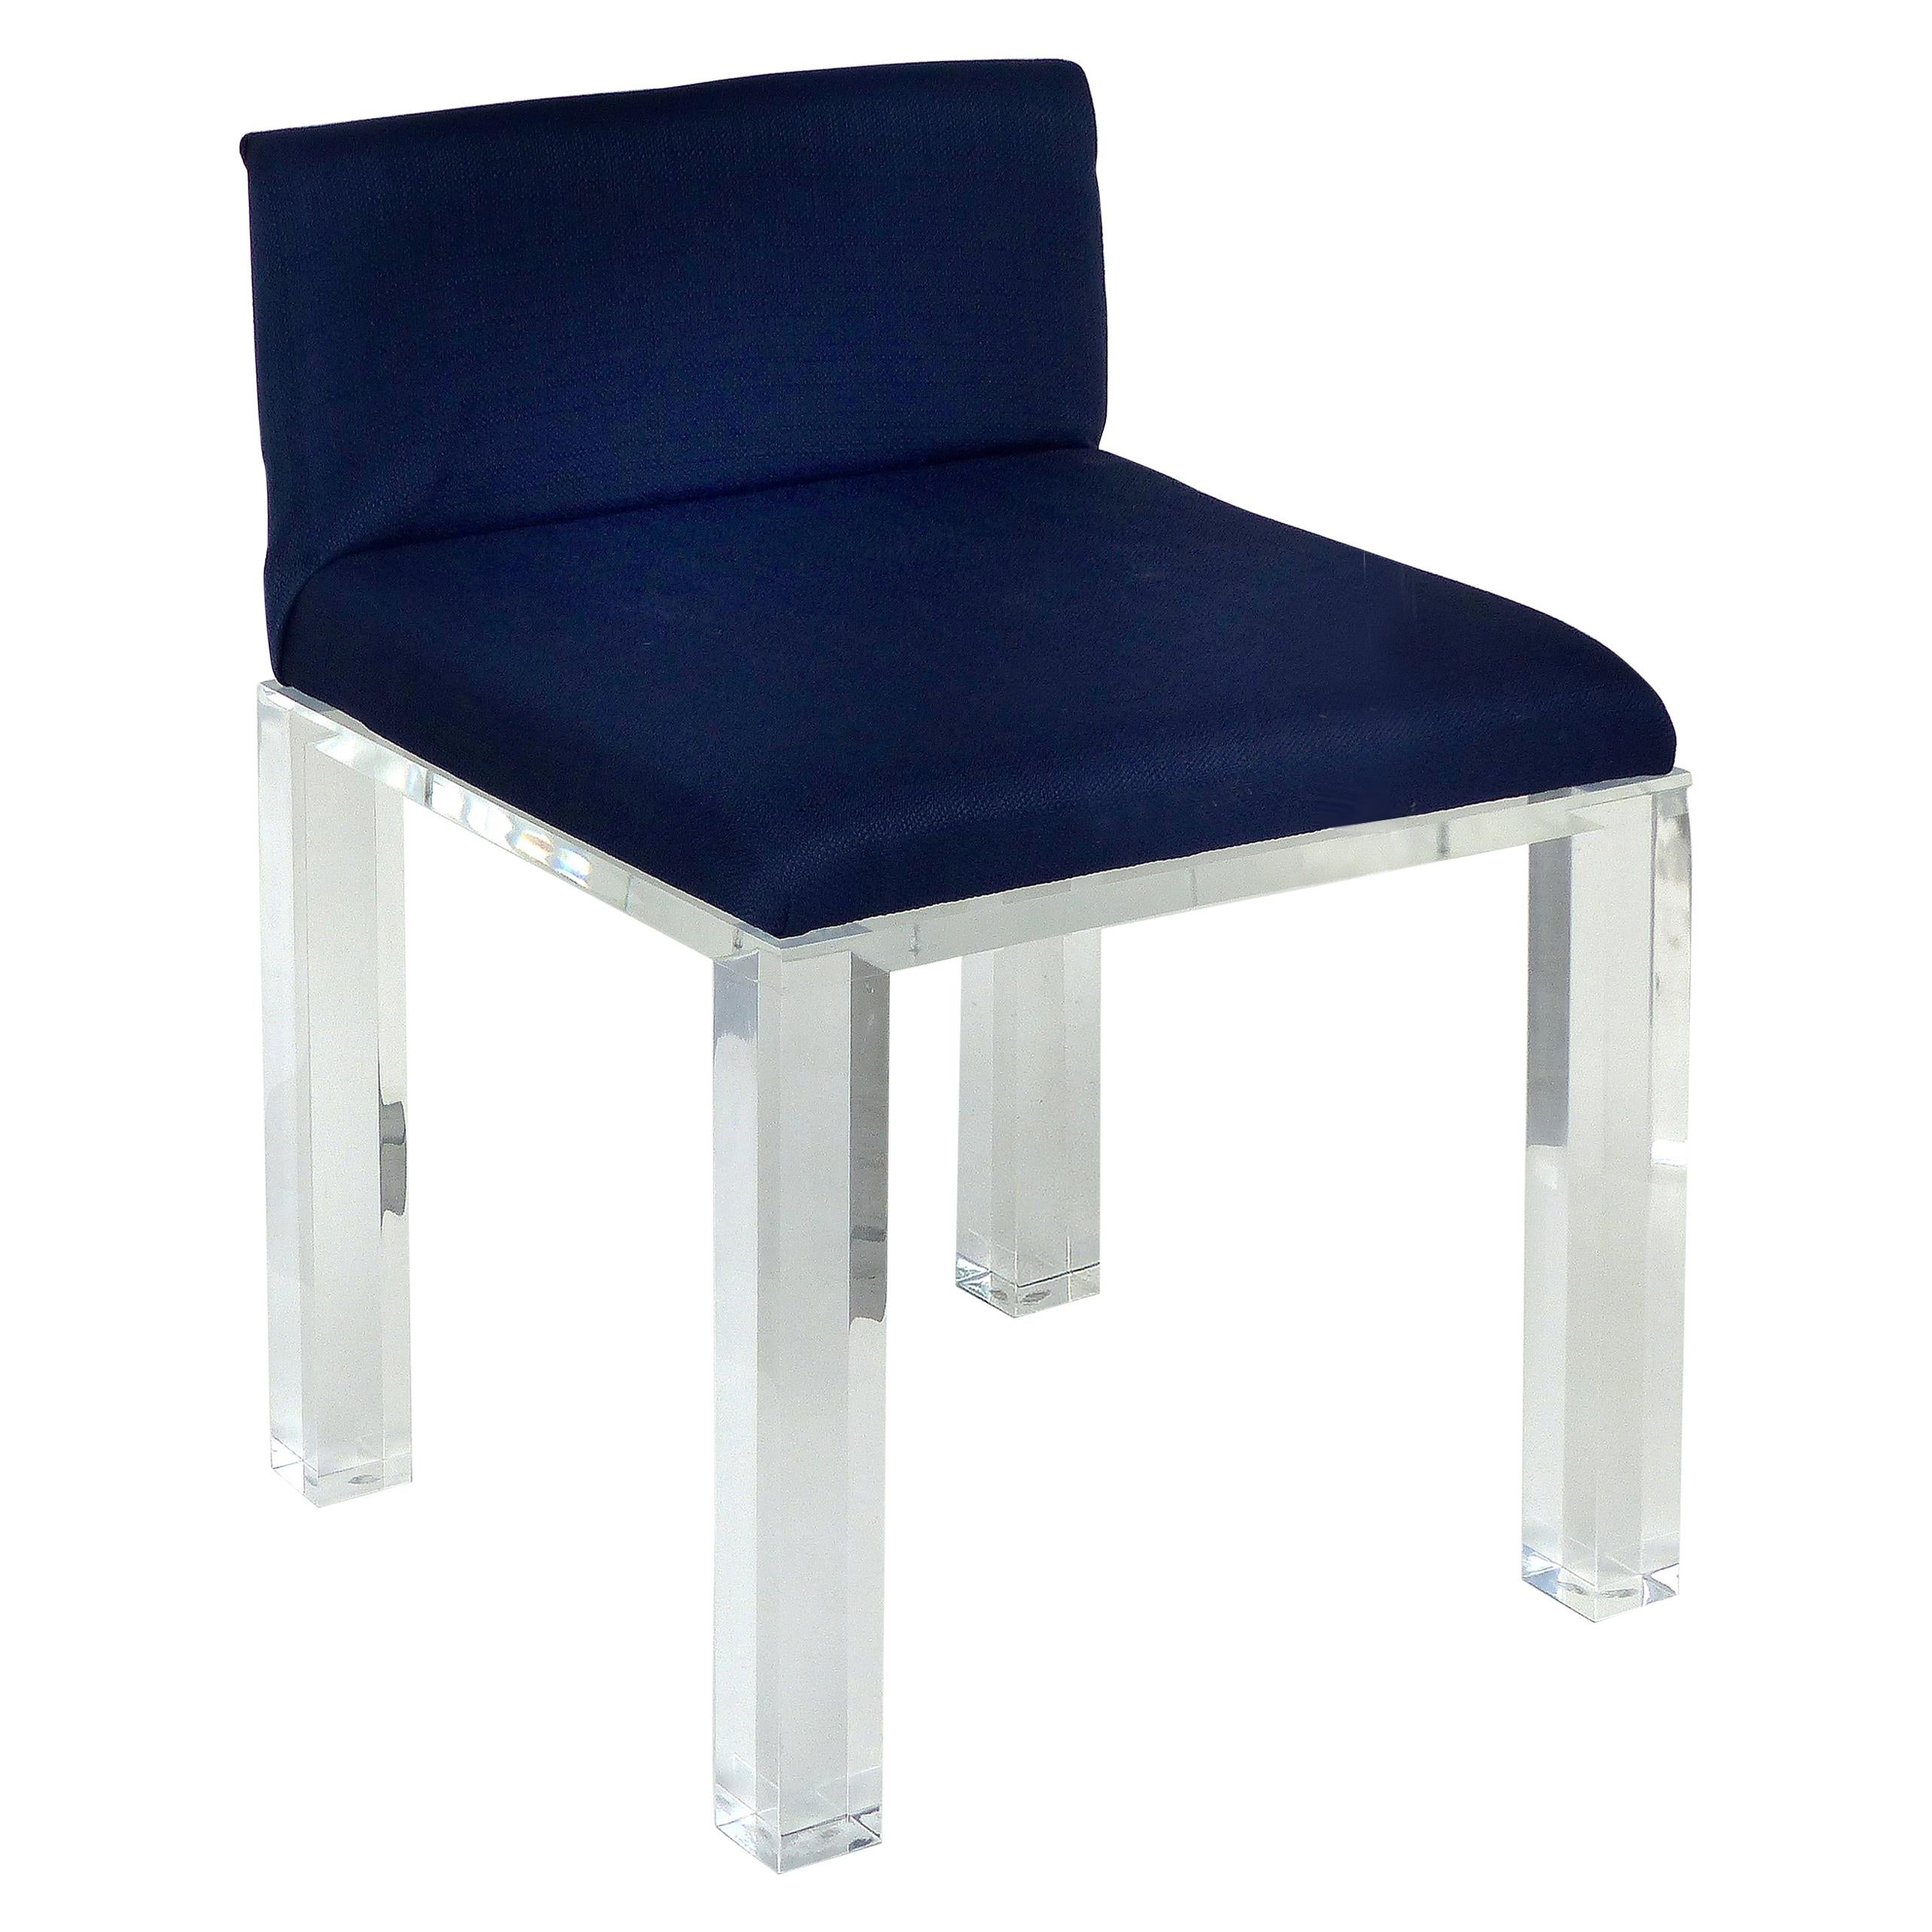 Custom Lucite Vanity Bench or Stool with Thick Lucite Legs and Upholstered Seat